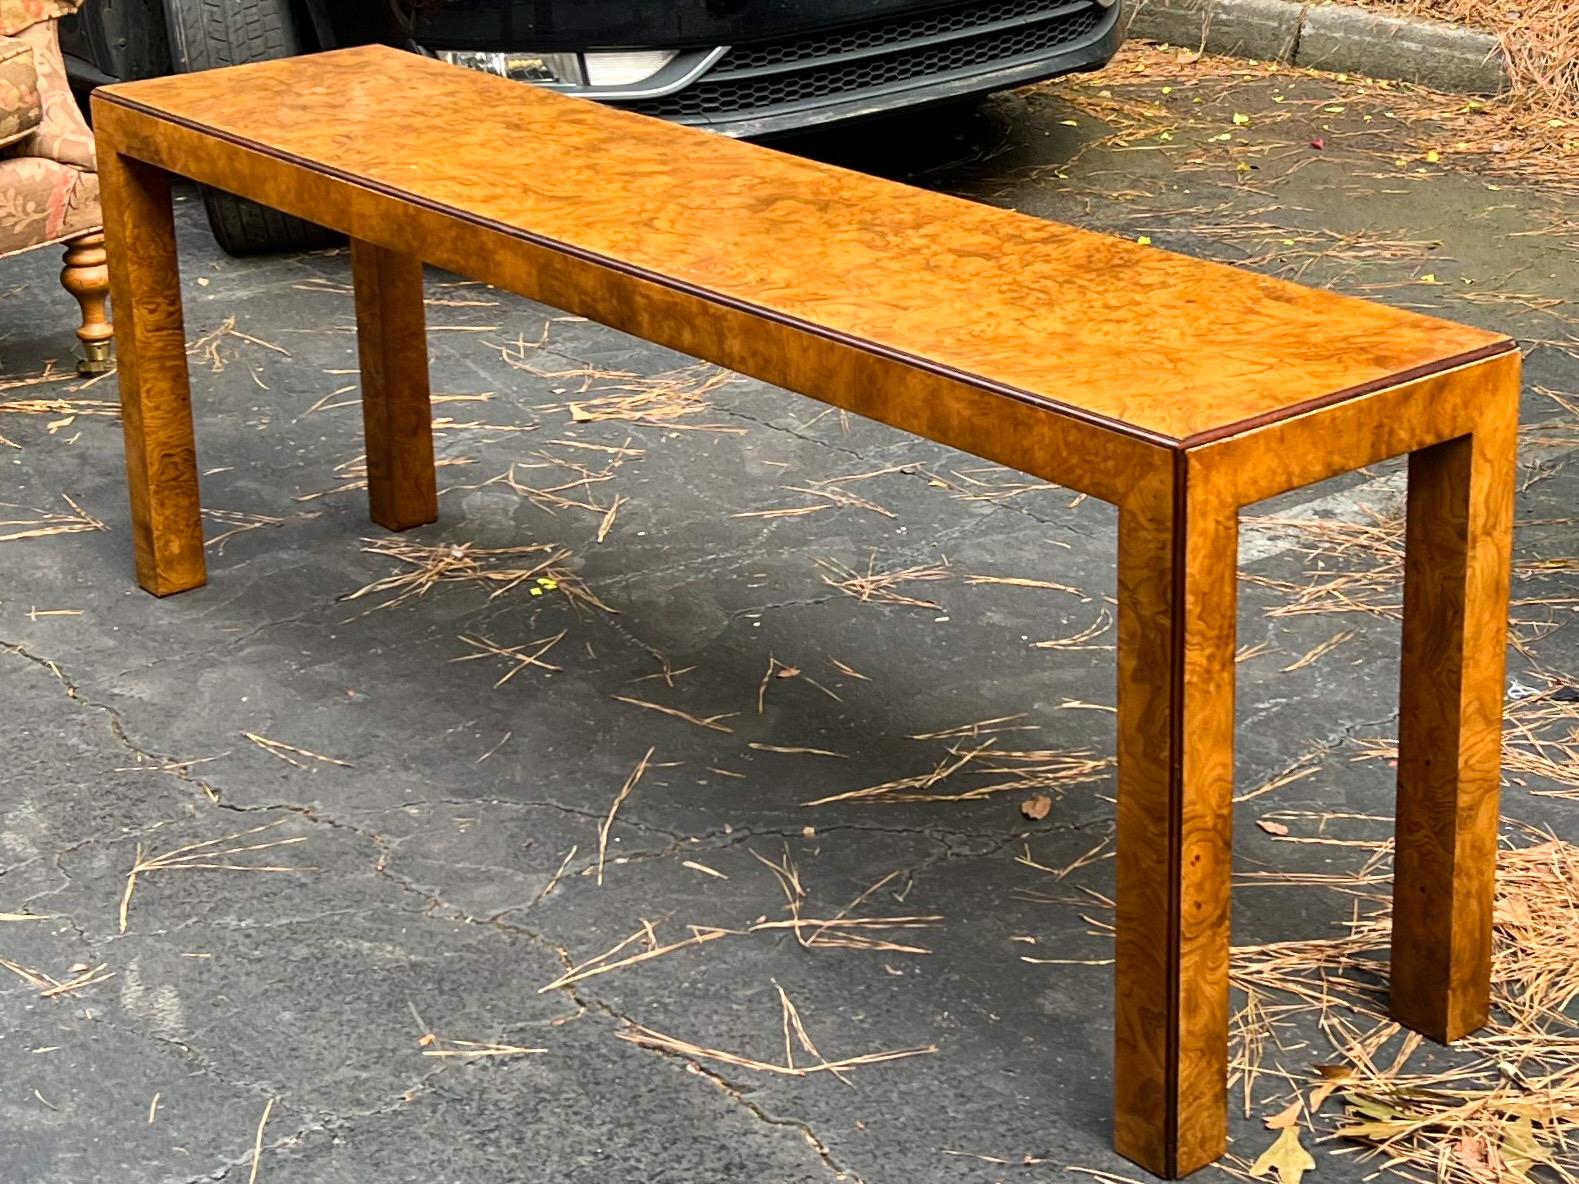 This console table works well in a variety of settings! It is a burlwood Parsons style piece by John Widdicomb in Grand Rapids Michigan. Its simplicity allows the wood to make the statement. I love the warm tones of burl. It is marked and in very